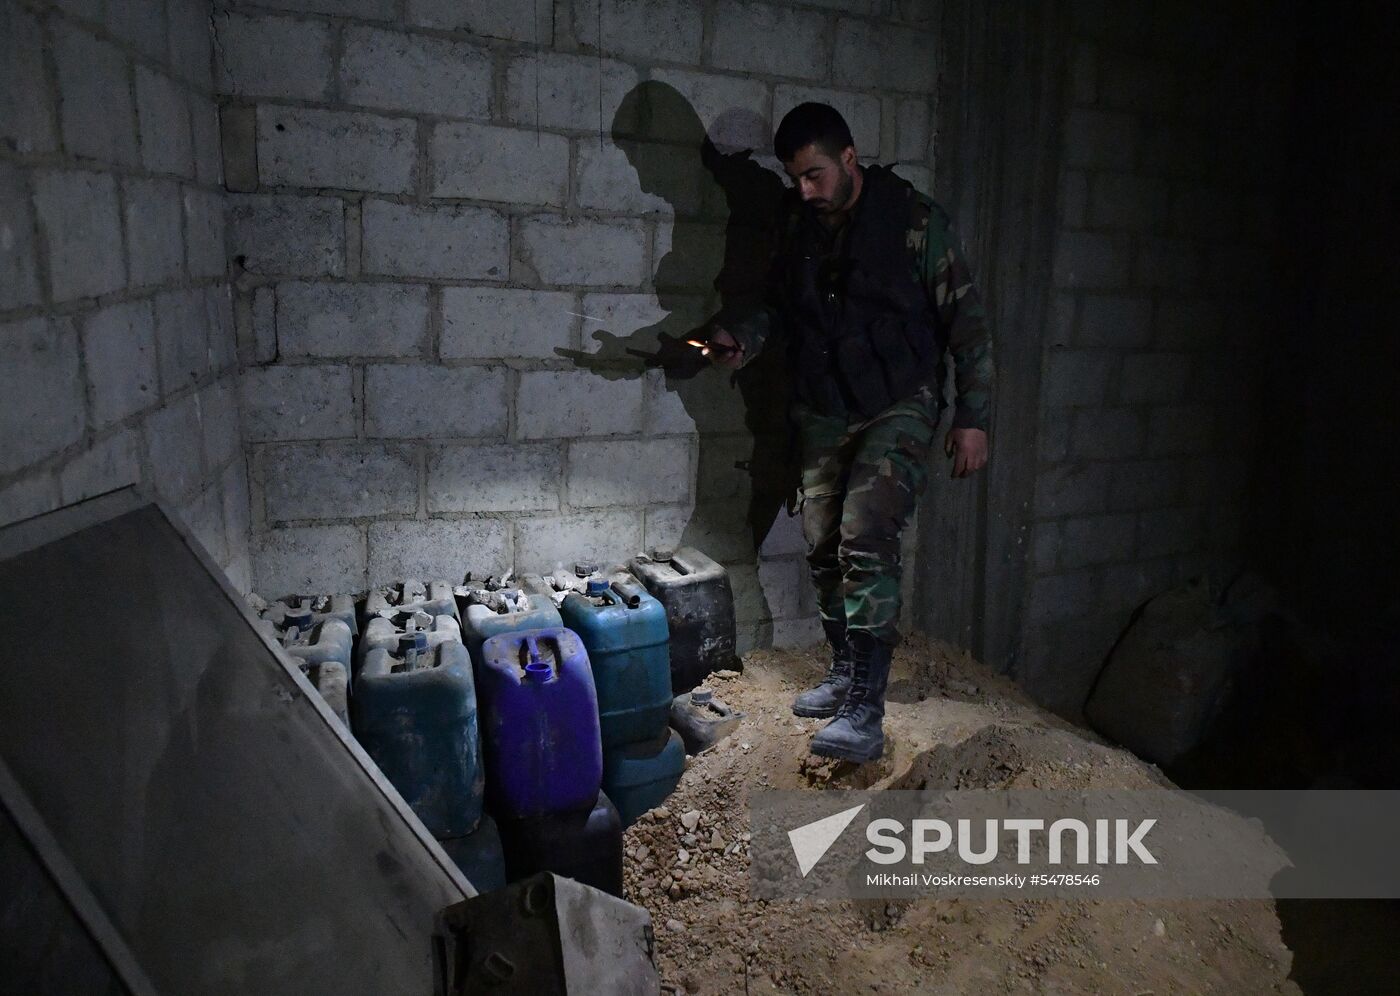 Militants' chemical laboratory in Syrian town of Douma